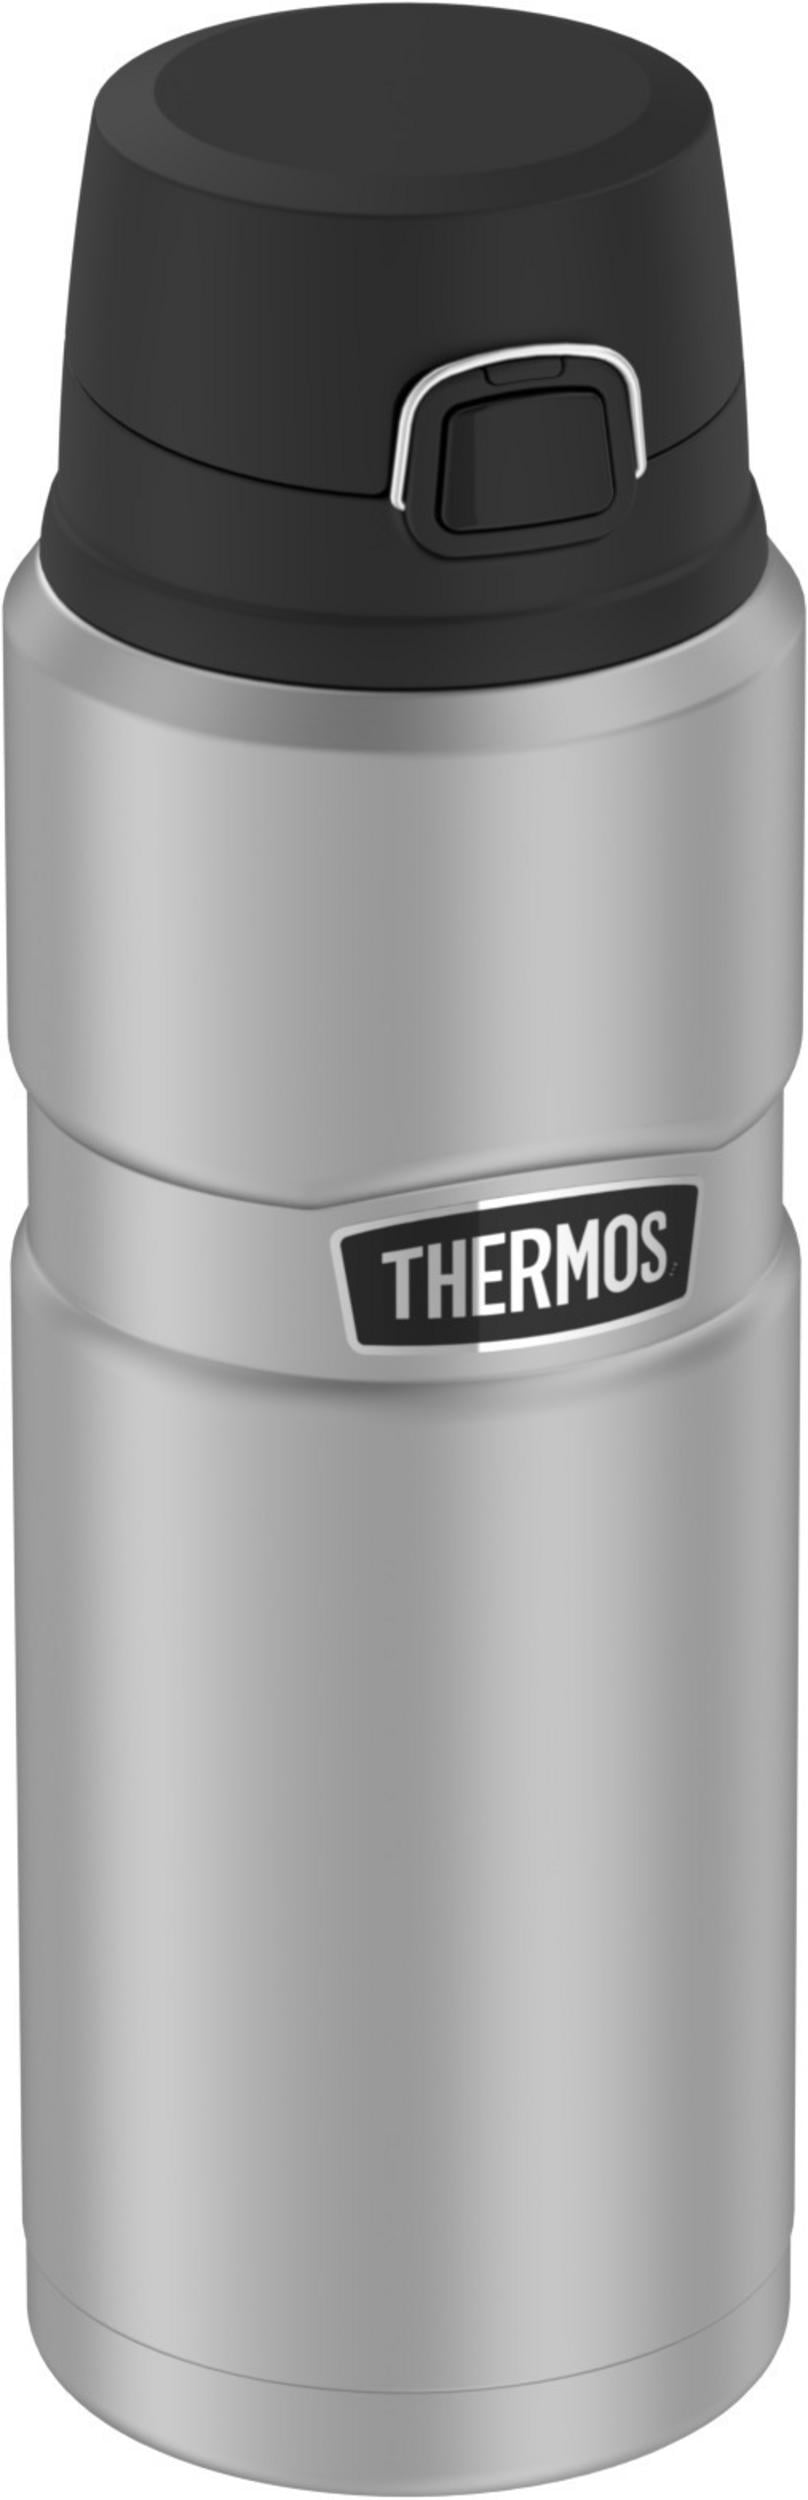 Thermos Guardian 24oz Stainless Steel Hydration Bottle (Matte Red) - Matte  Red - Bed Bath & Beyond - 30922307